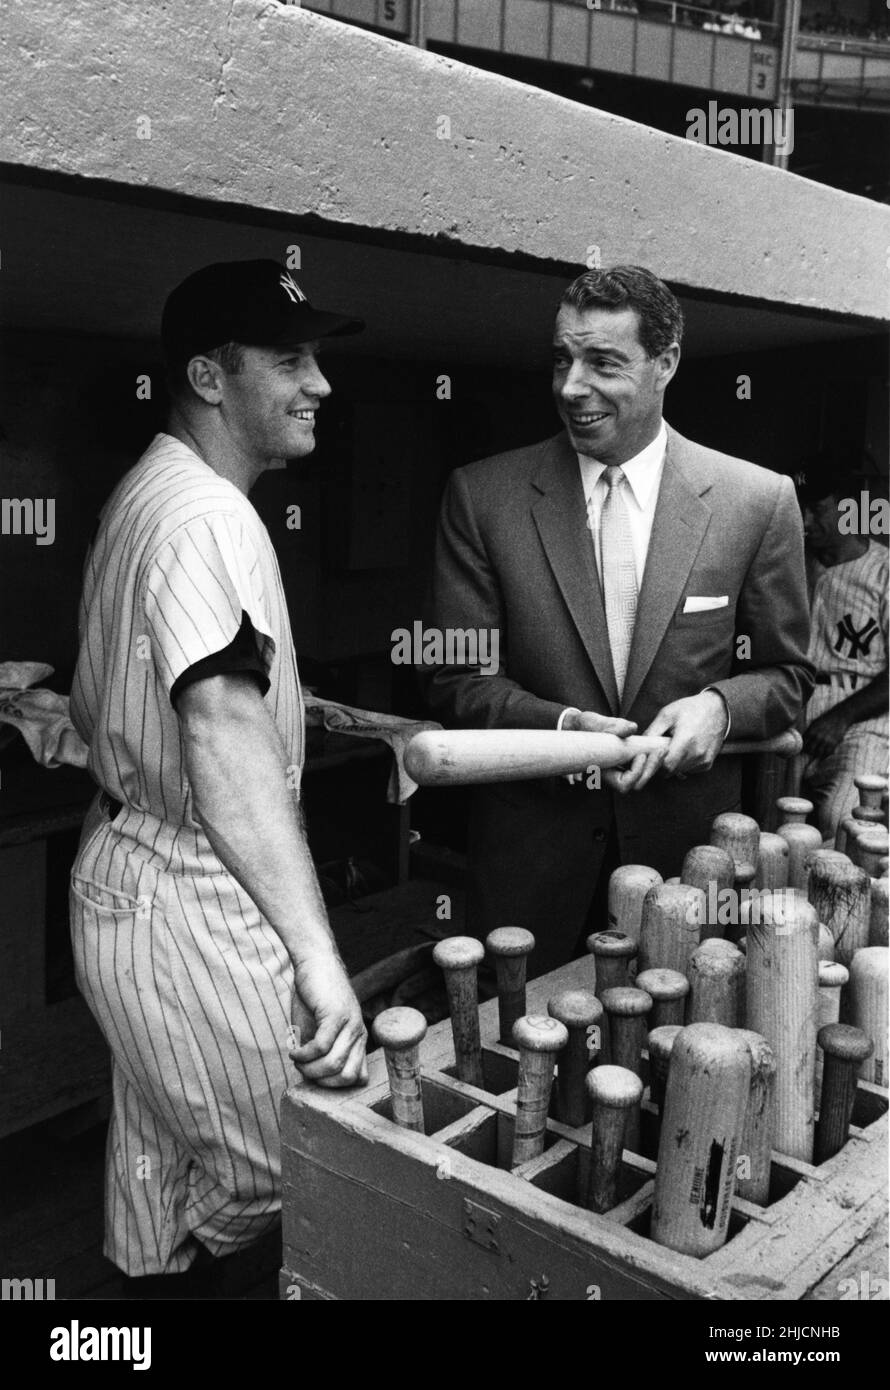 A retired Joe DiMaggio stops by to chat with Mickey Mantle in 1956. Stock Photo